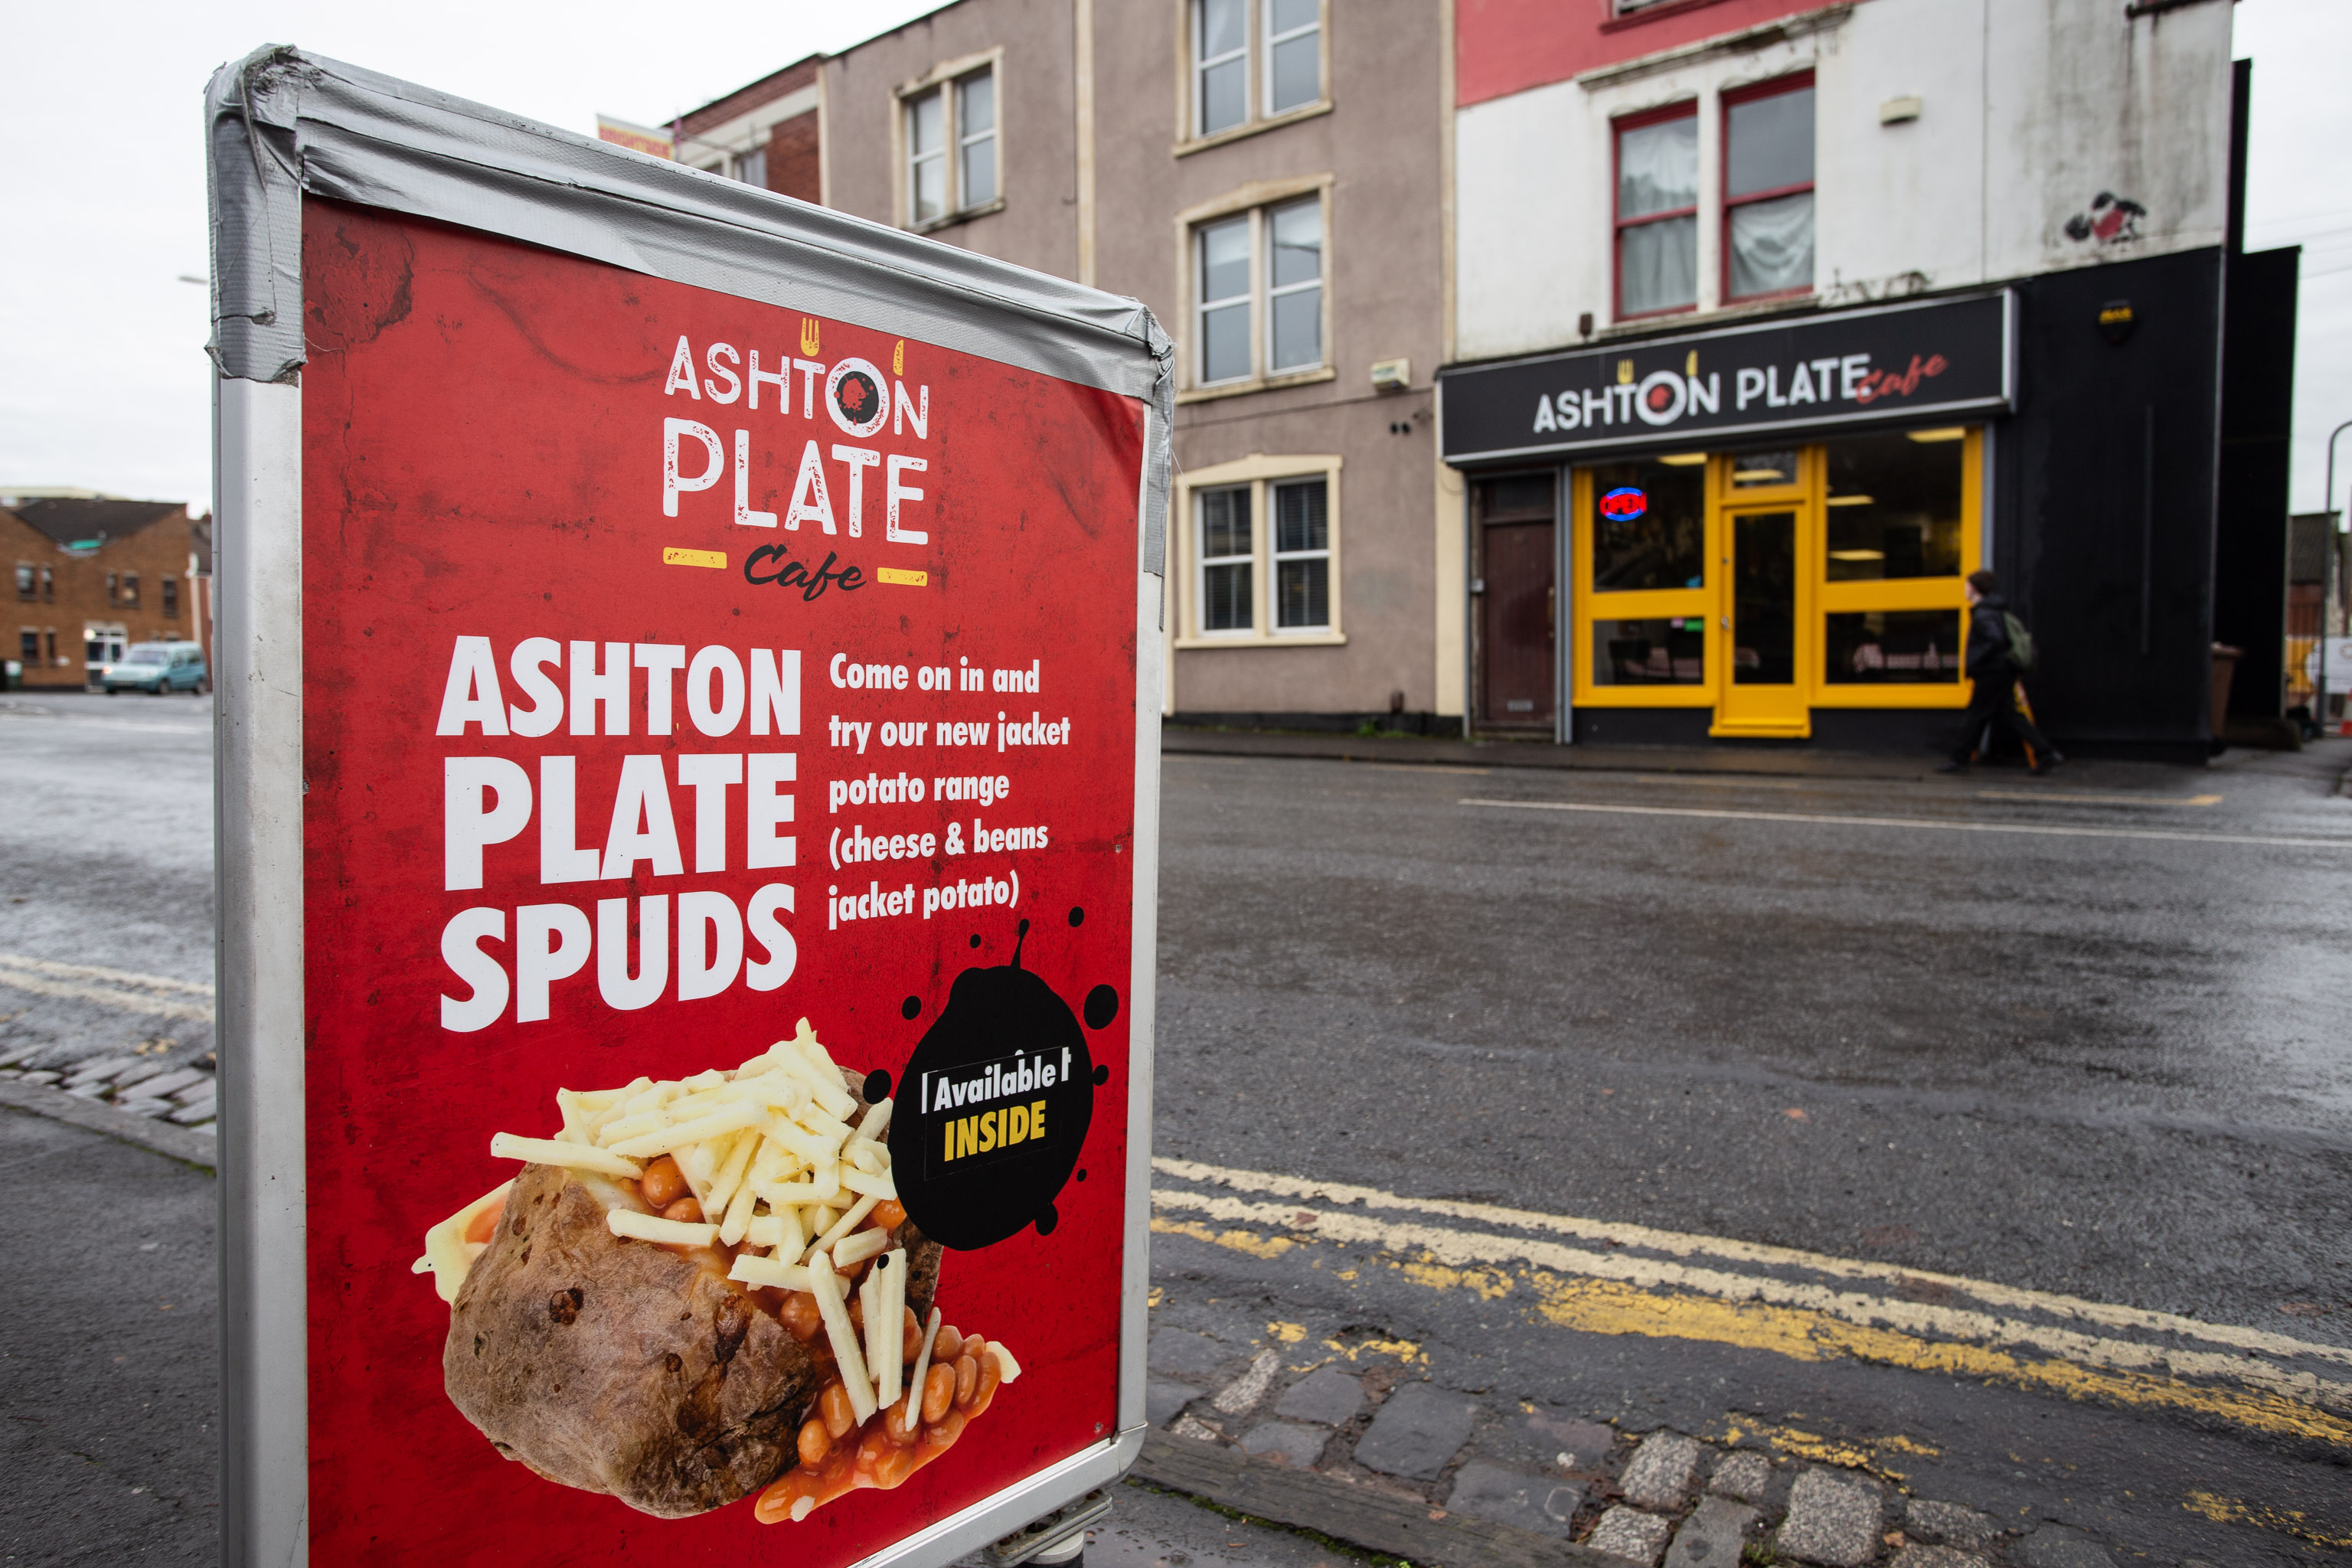 ASHTON PLATE SPUDS
Dear fellow photographers: If you're going to take a picture like this, you could at least whack the potato through the microwave first, so it at l...